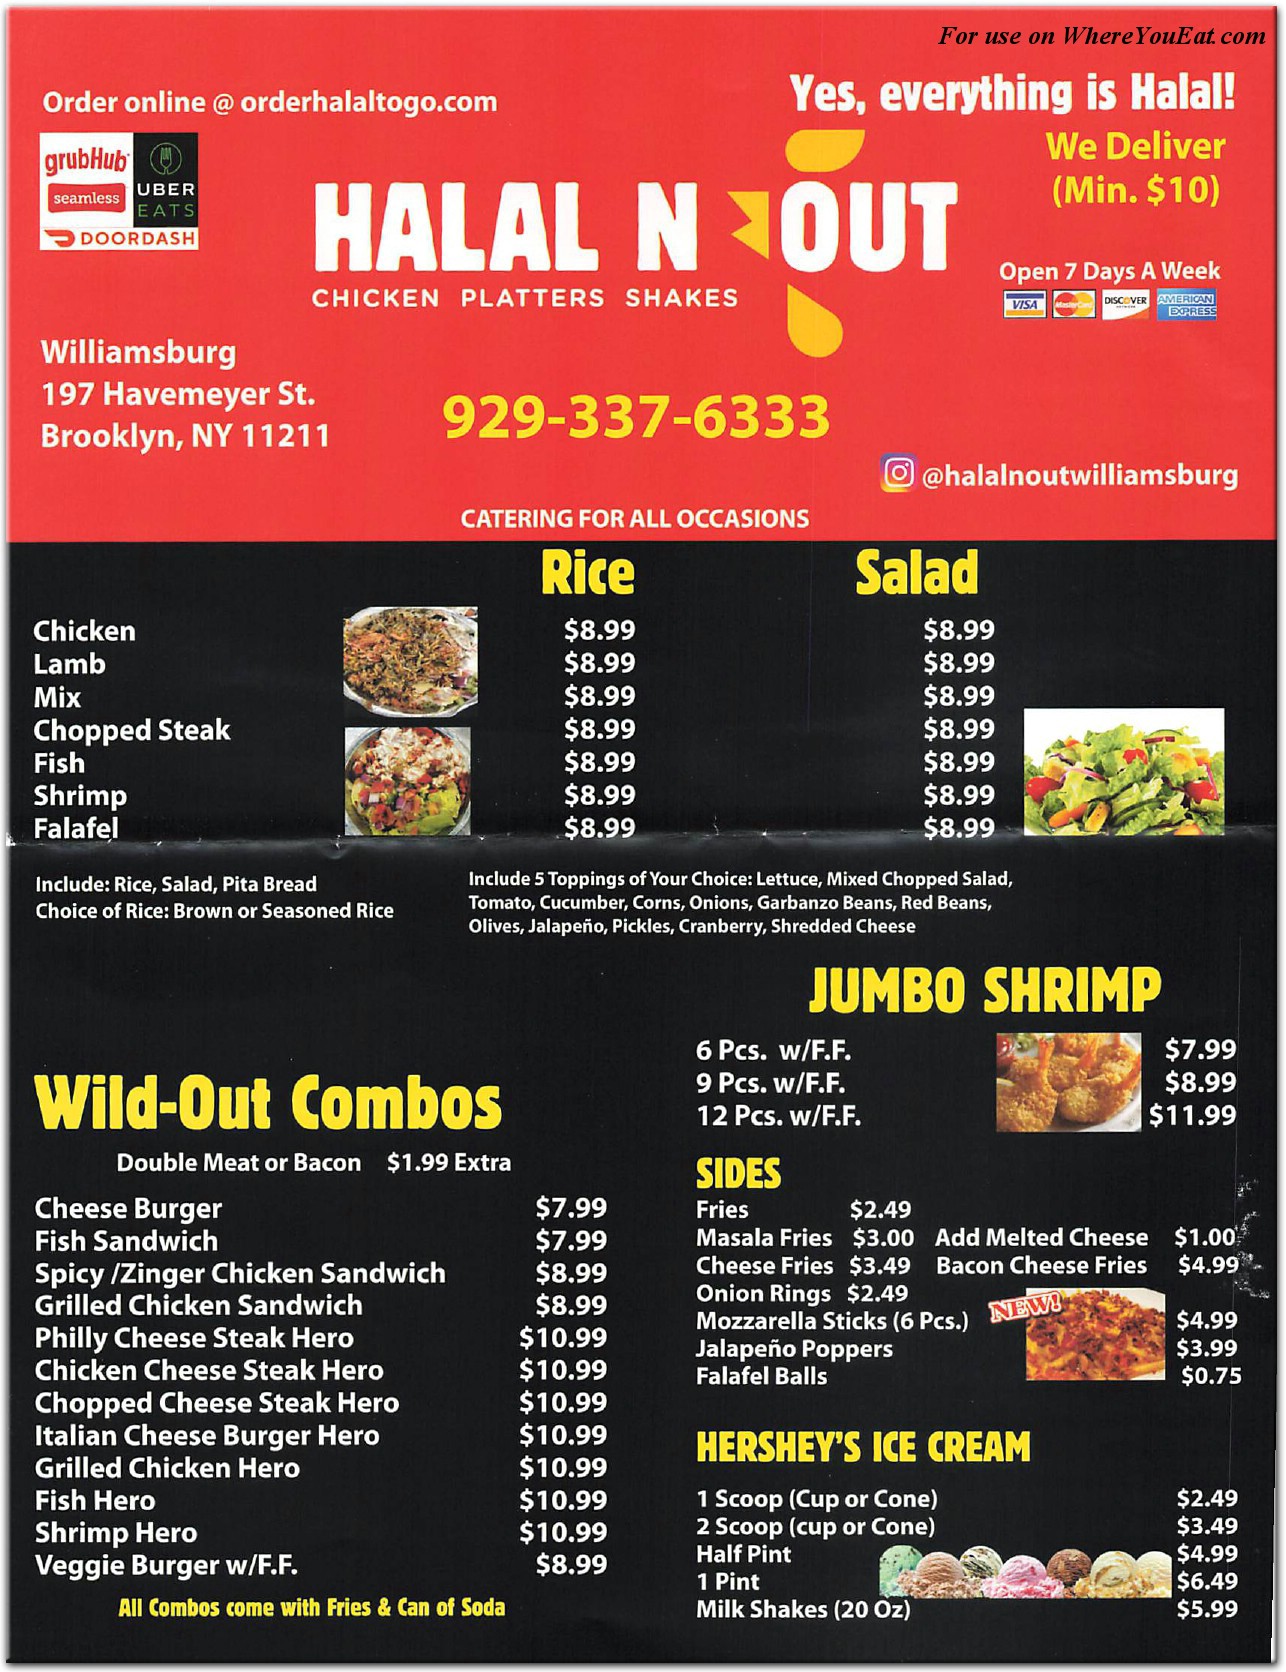 Halal N Out Page 0002 